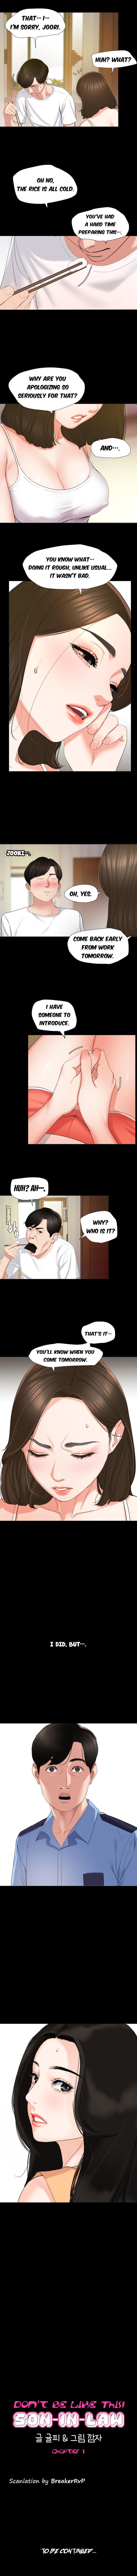 [Kkamja] Don't be like this son-in-law [English] 7